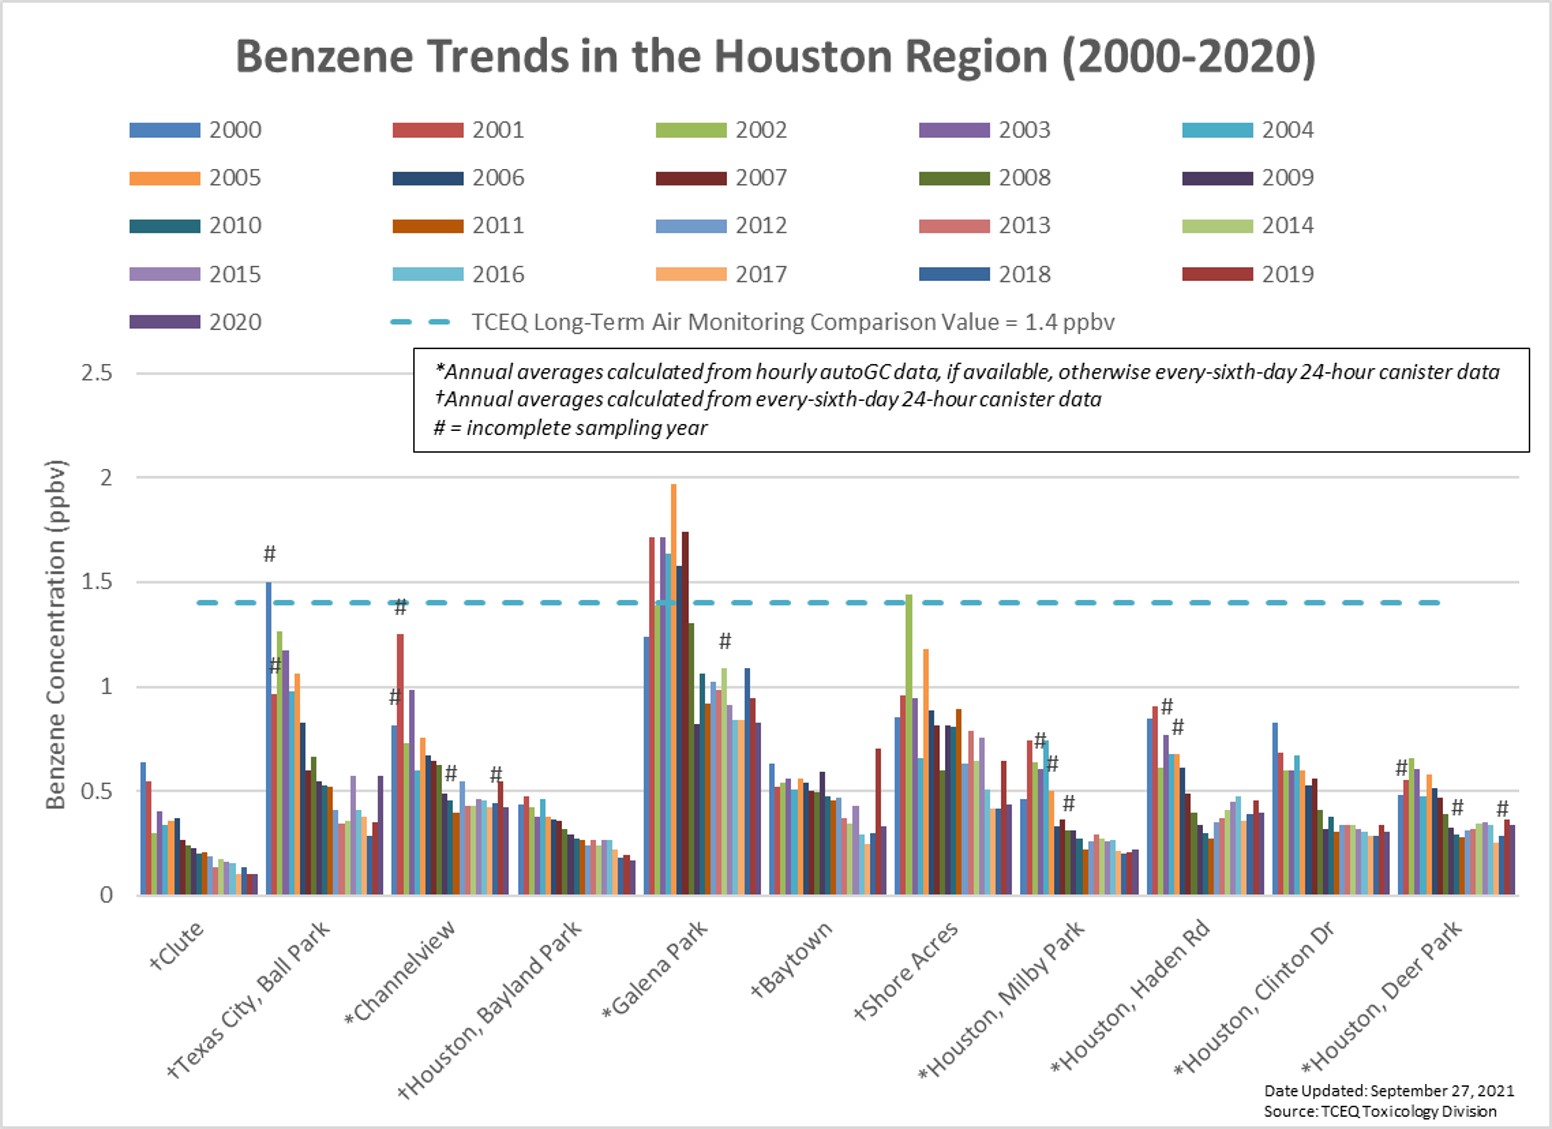 Benzene monitoring trends in the Houston area from 2000 to 2020